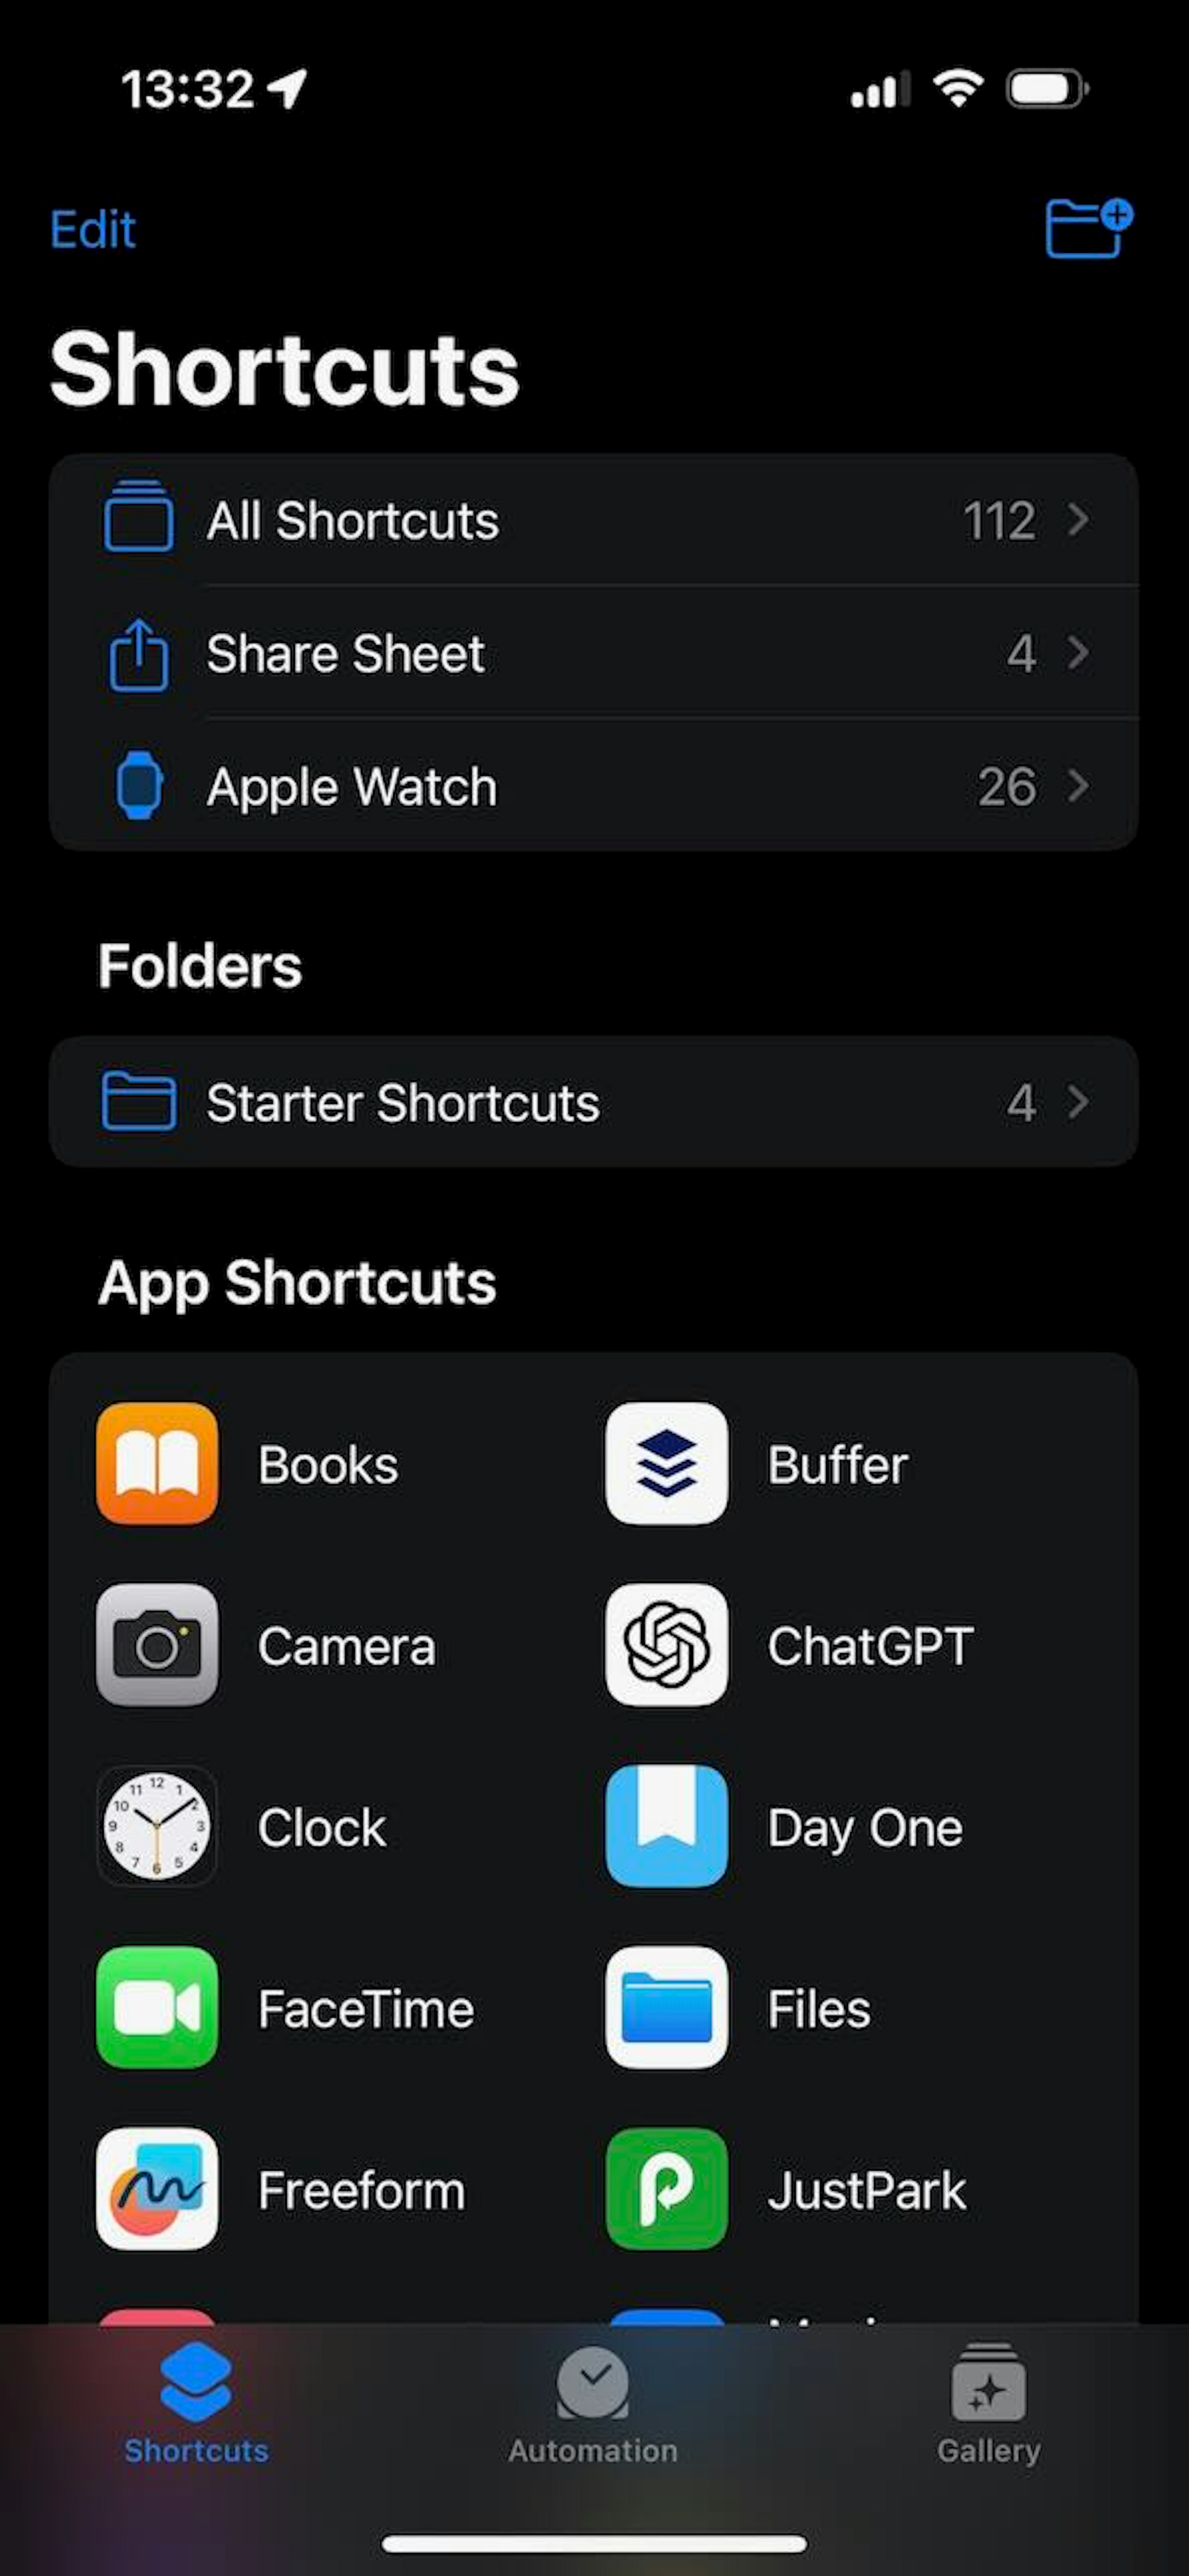 Fig 5: The shortcuts app. Uses an icon button on the right and text button on the left. Both are normal weight and use
the accent colour.